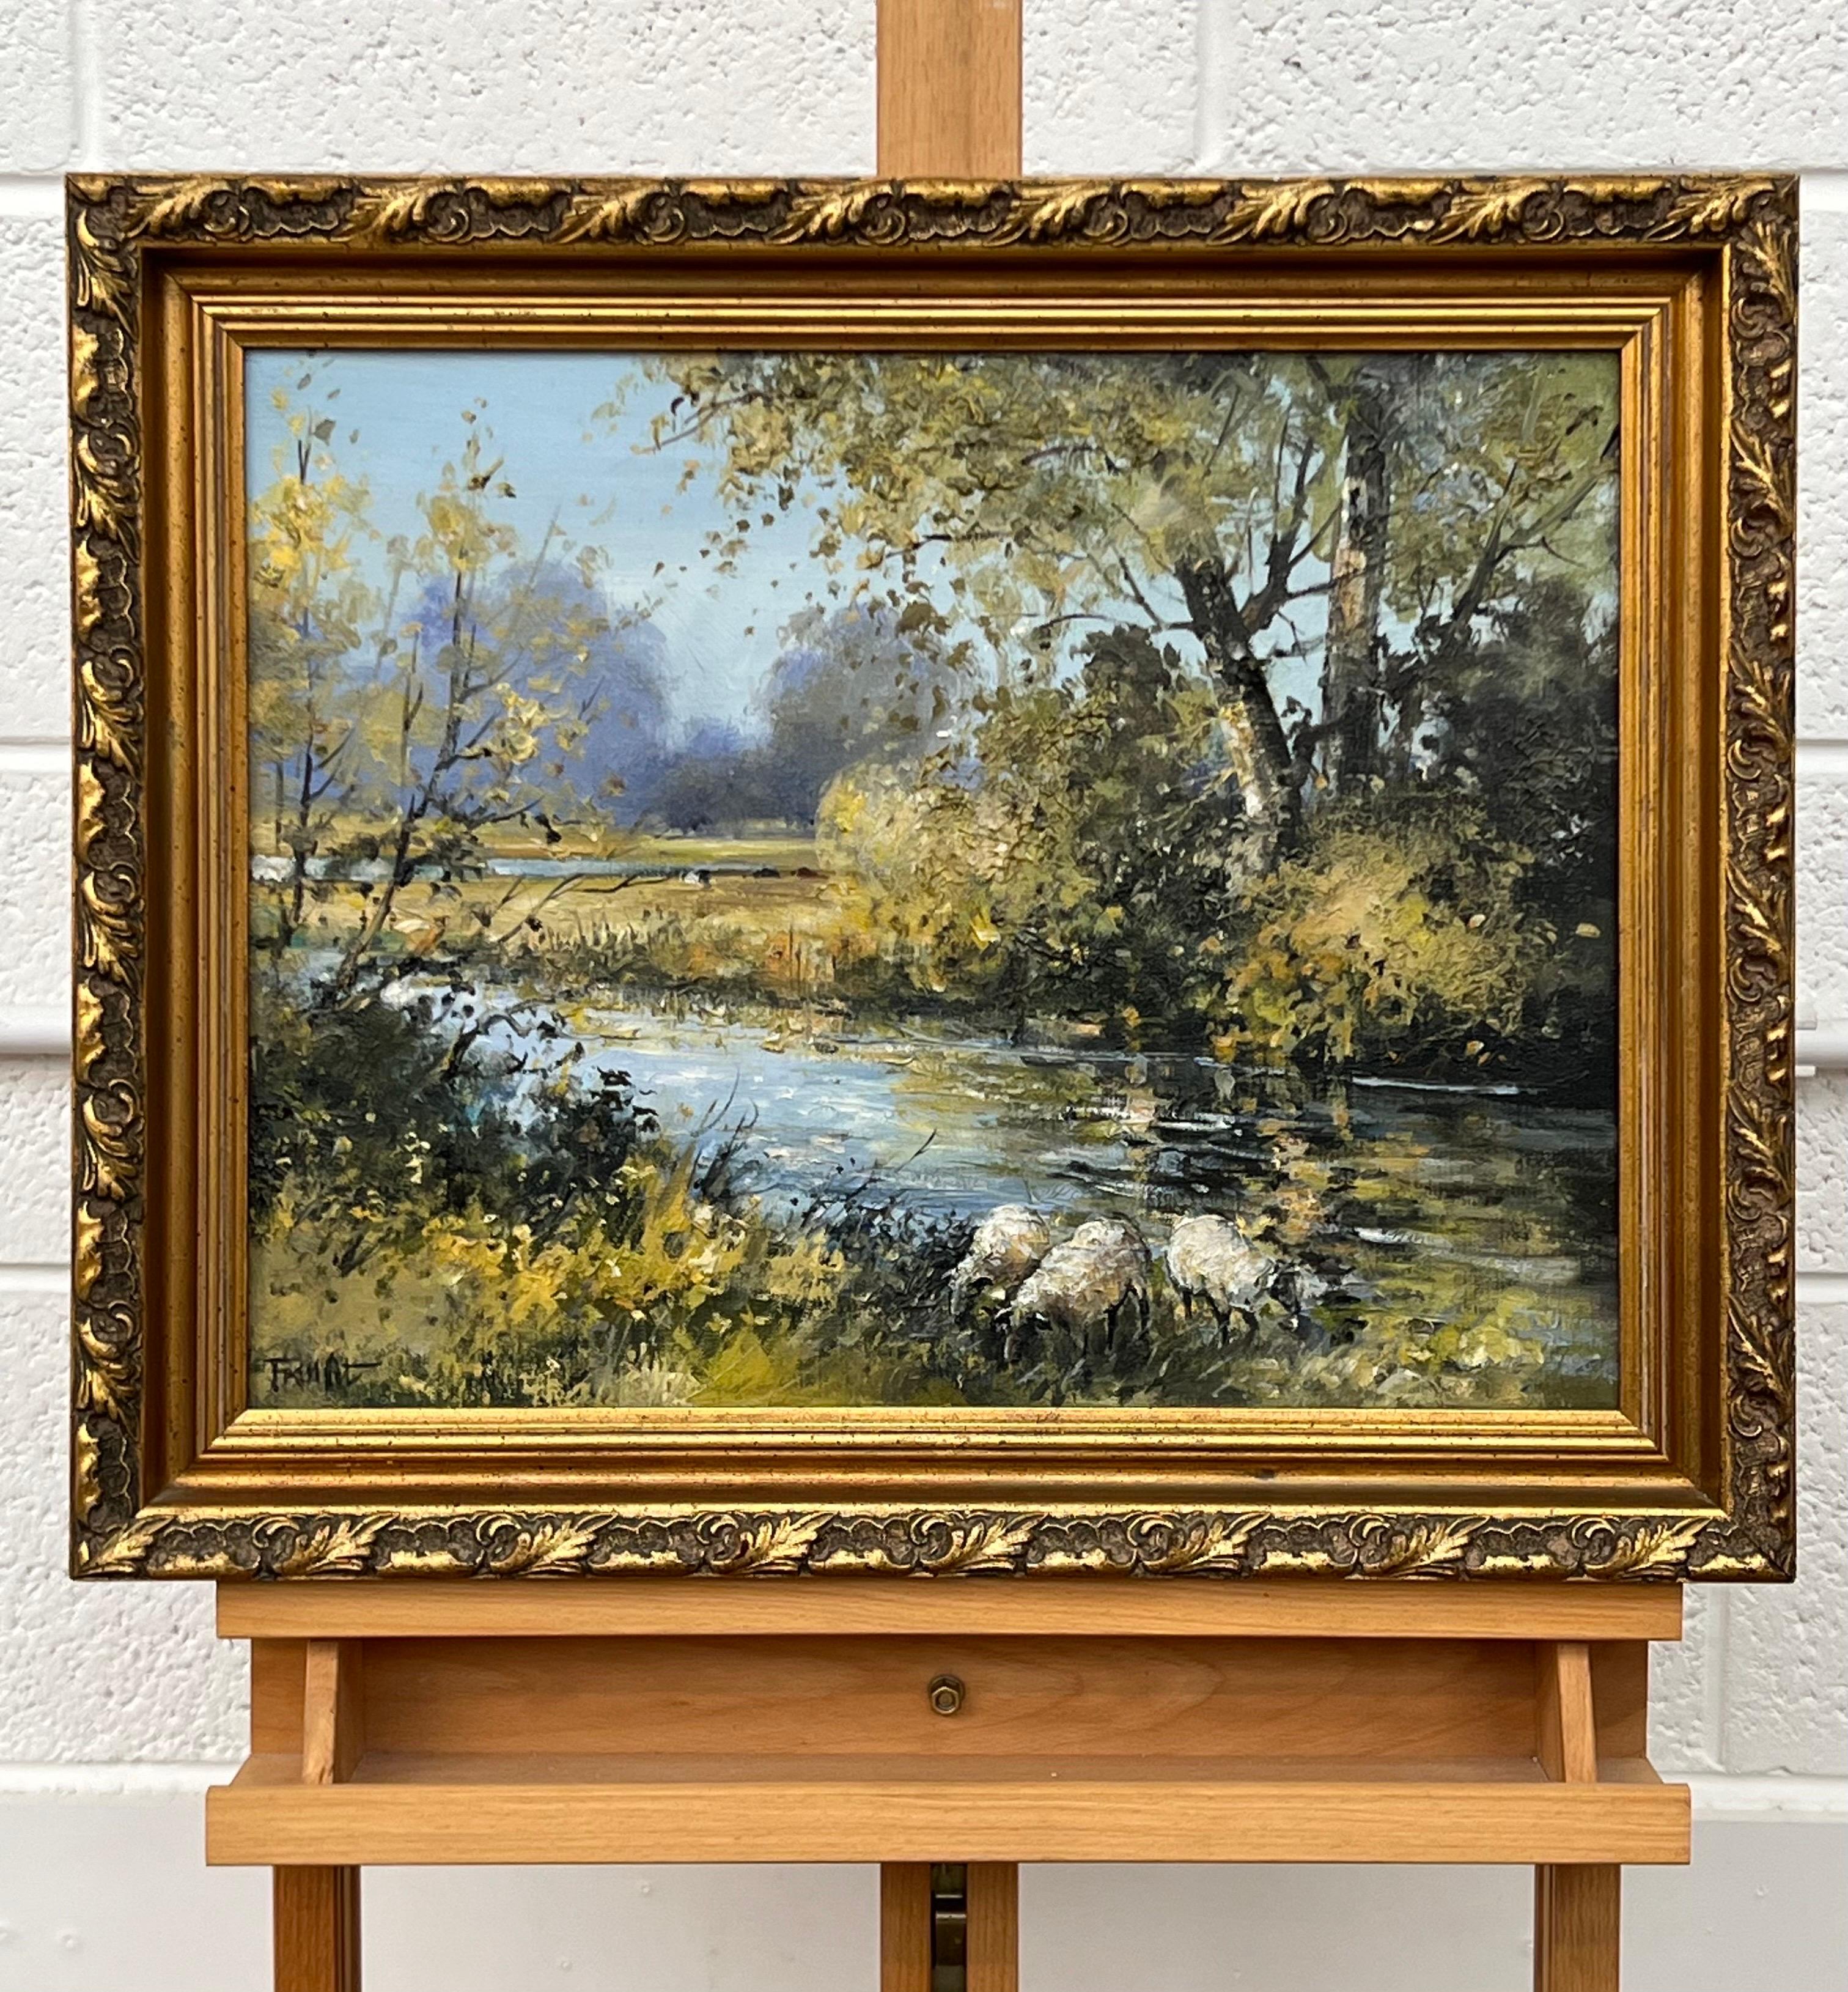 Sheep by an Idyllic Tree Lined River Landscape in Ireland by Modern Irish Artist For Sale 6